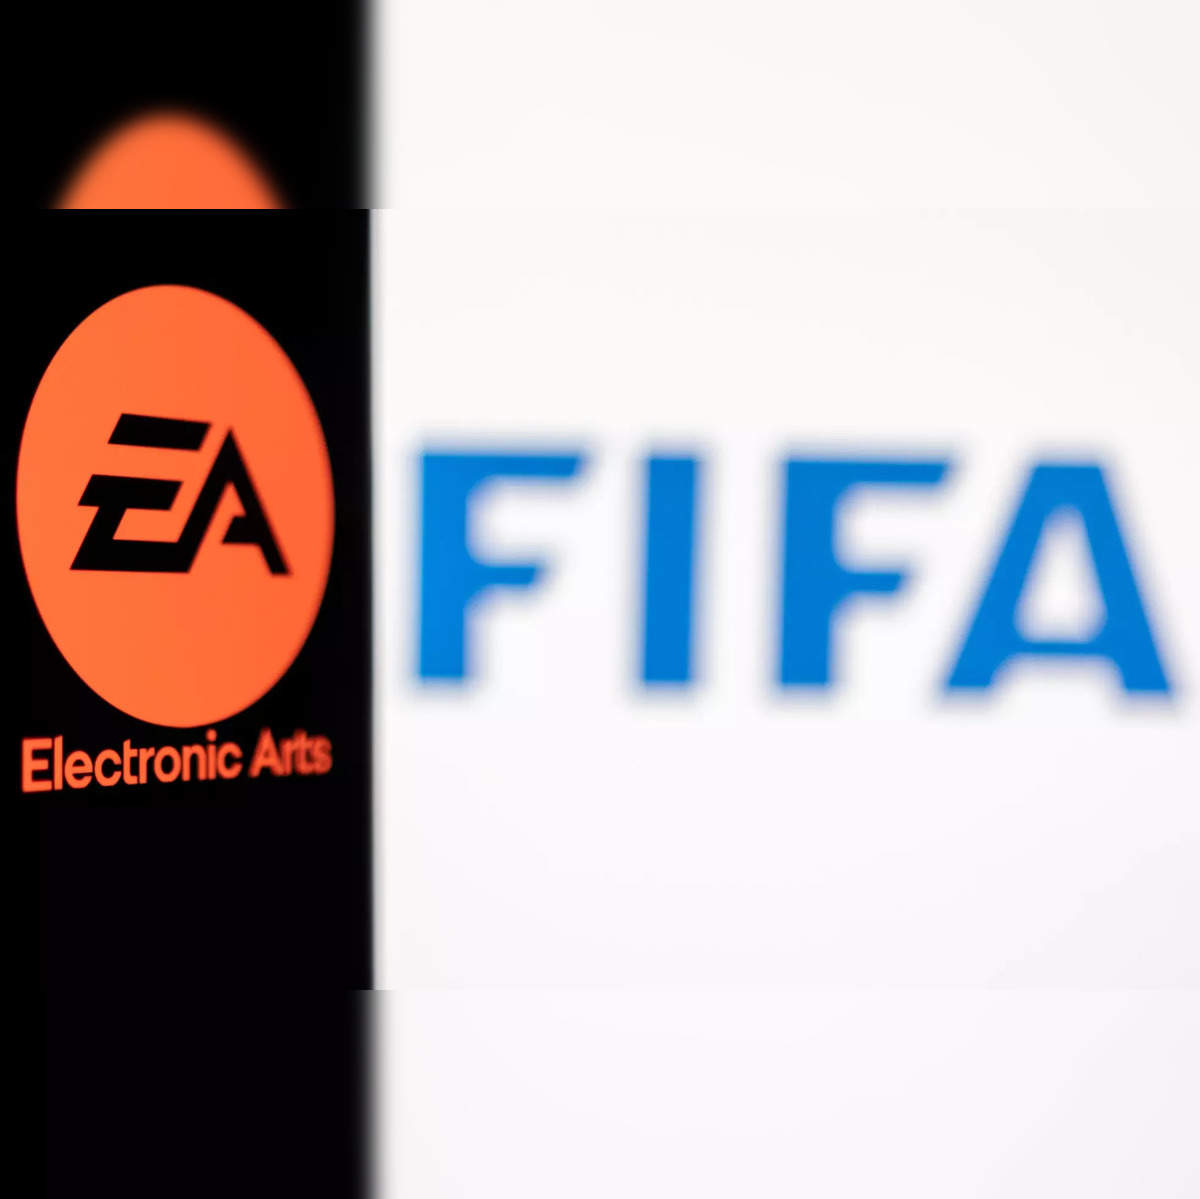 Download FIFA 21 Players Database – Schah